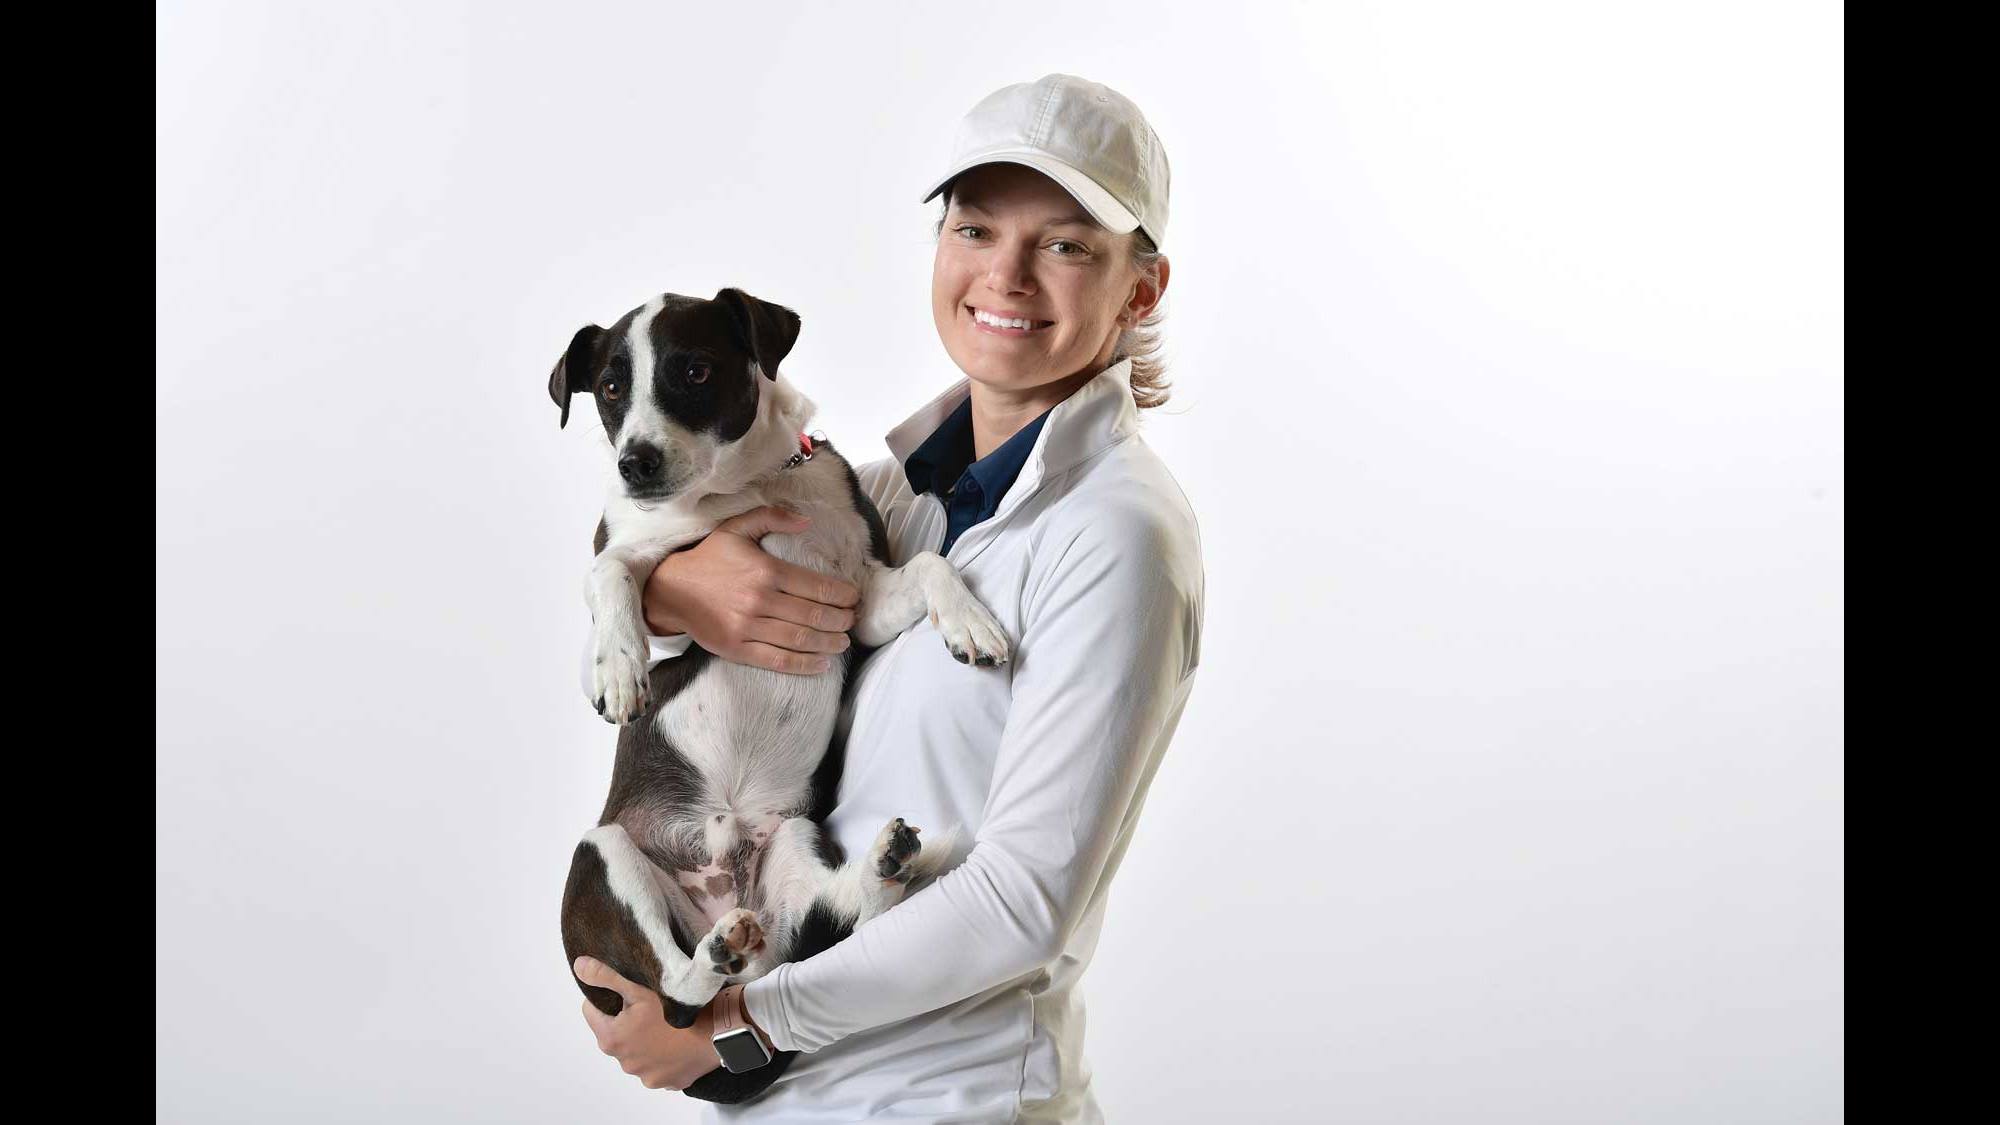 Cindy LaCrosse developed a passion for animal rescue by supporting local shelters at tournament sites on the LPGA Tour